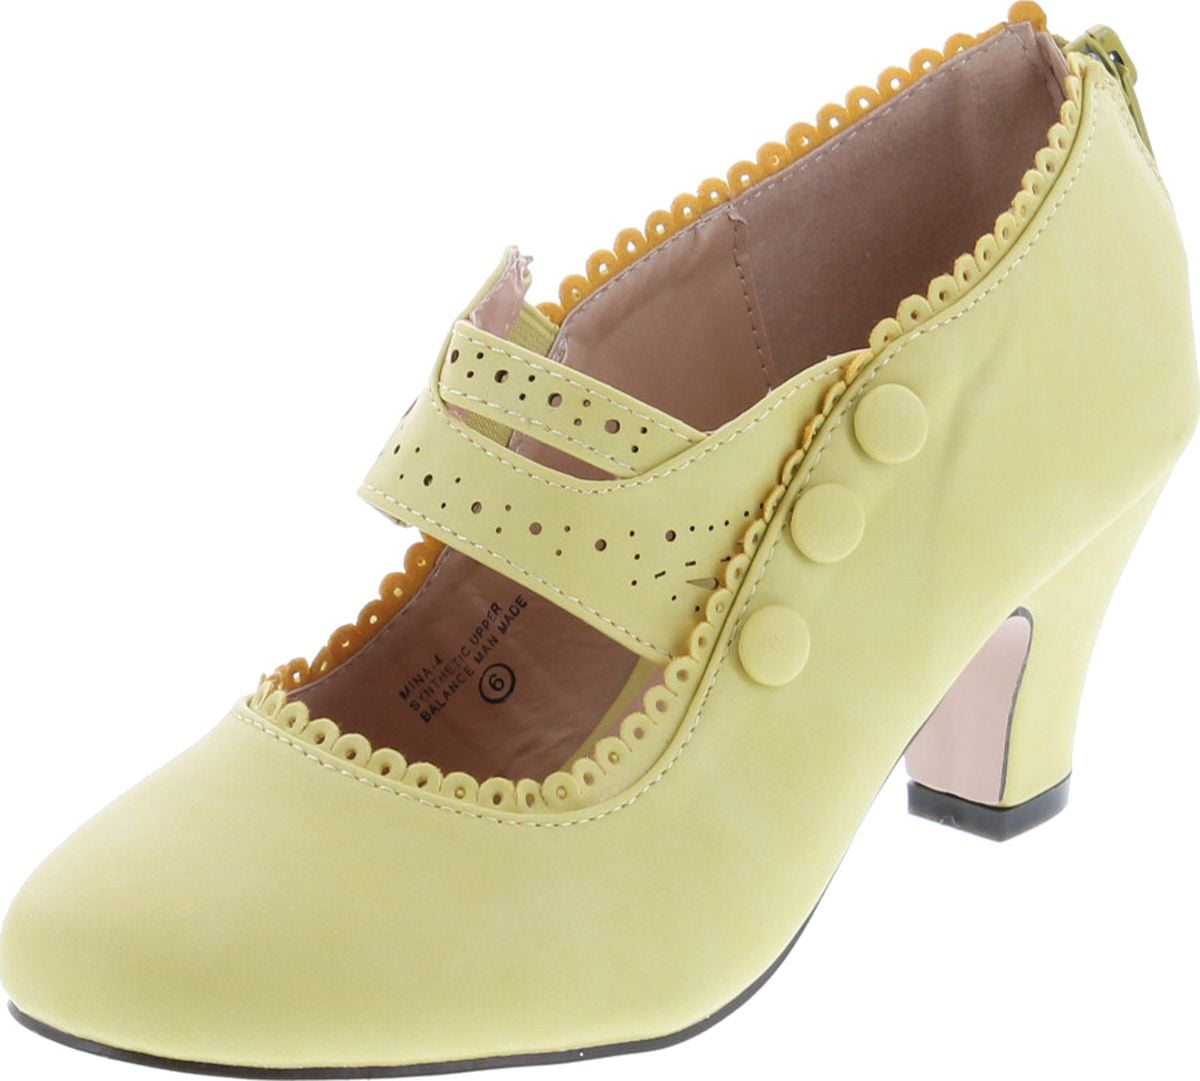 LOL Surprise Accessory Yellow Pom Heels Shoes 